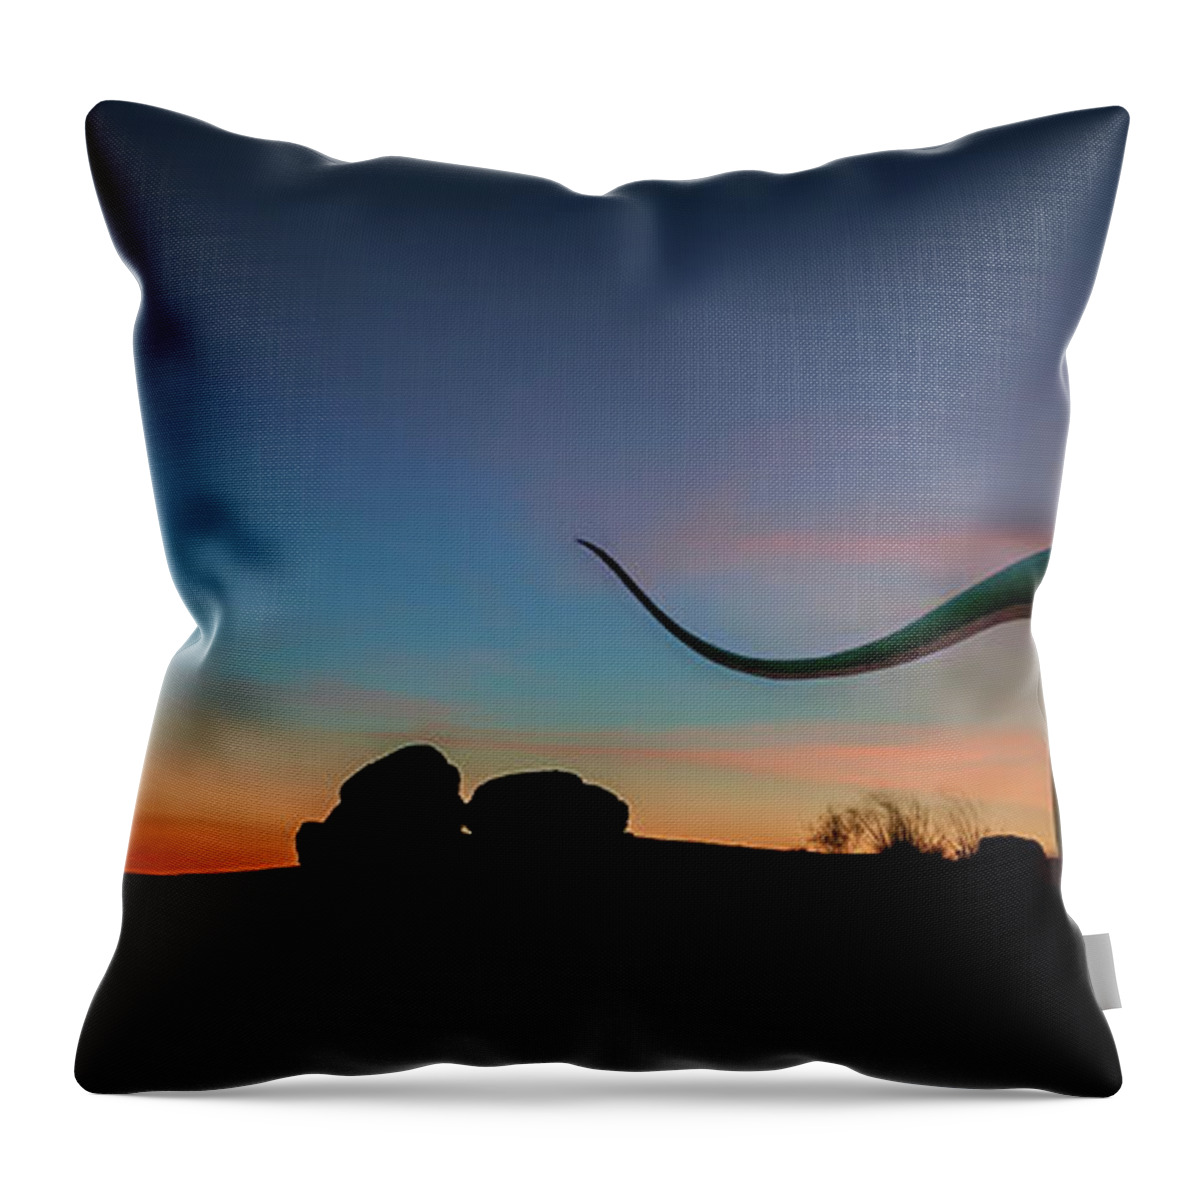 Arizona Highway Throw Pillow featuring the photograph Afterglow Dinosaur by Gary Warnimont